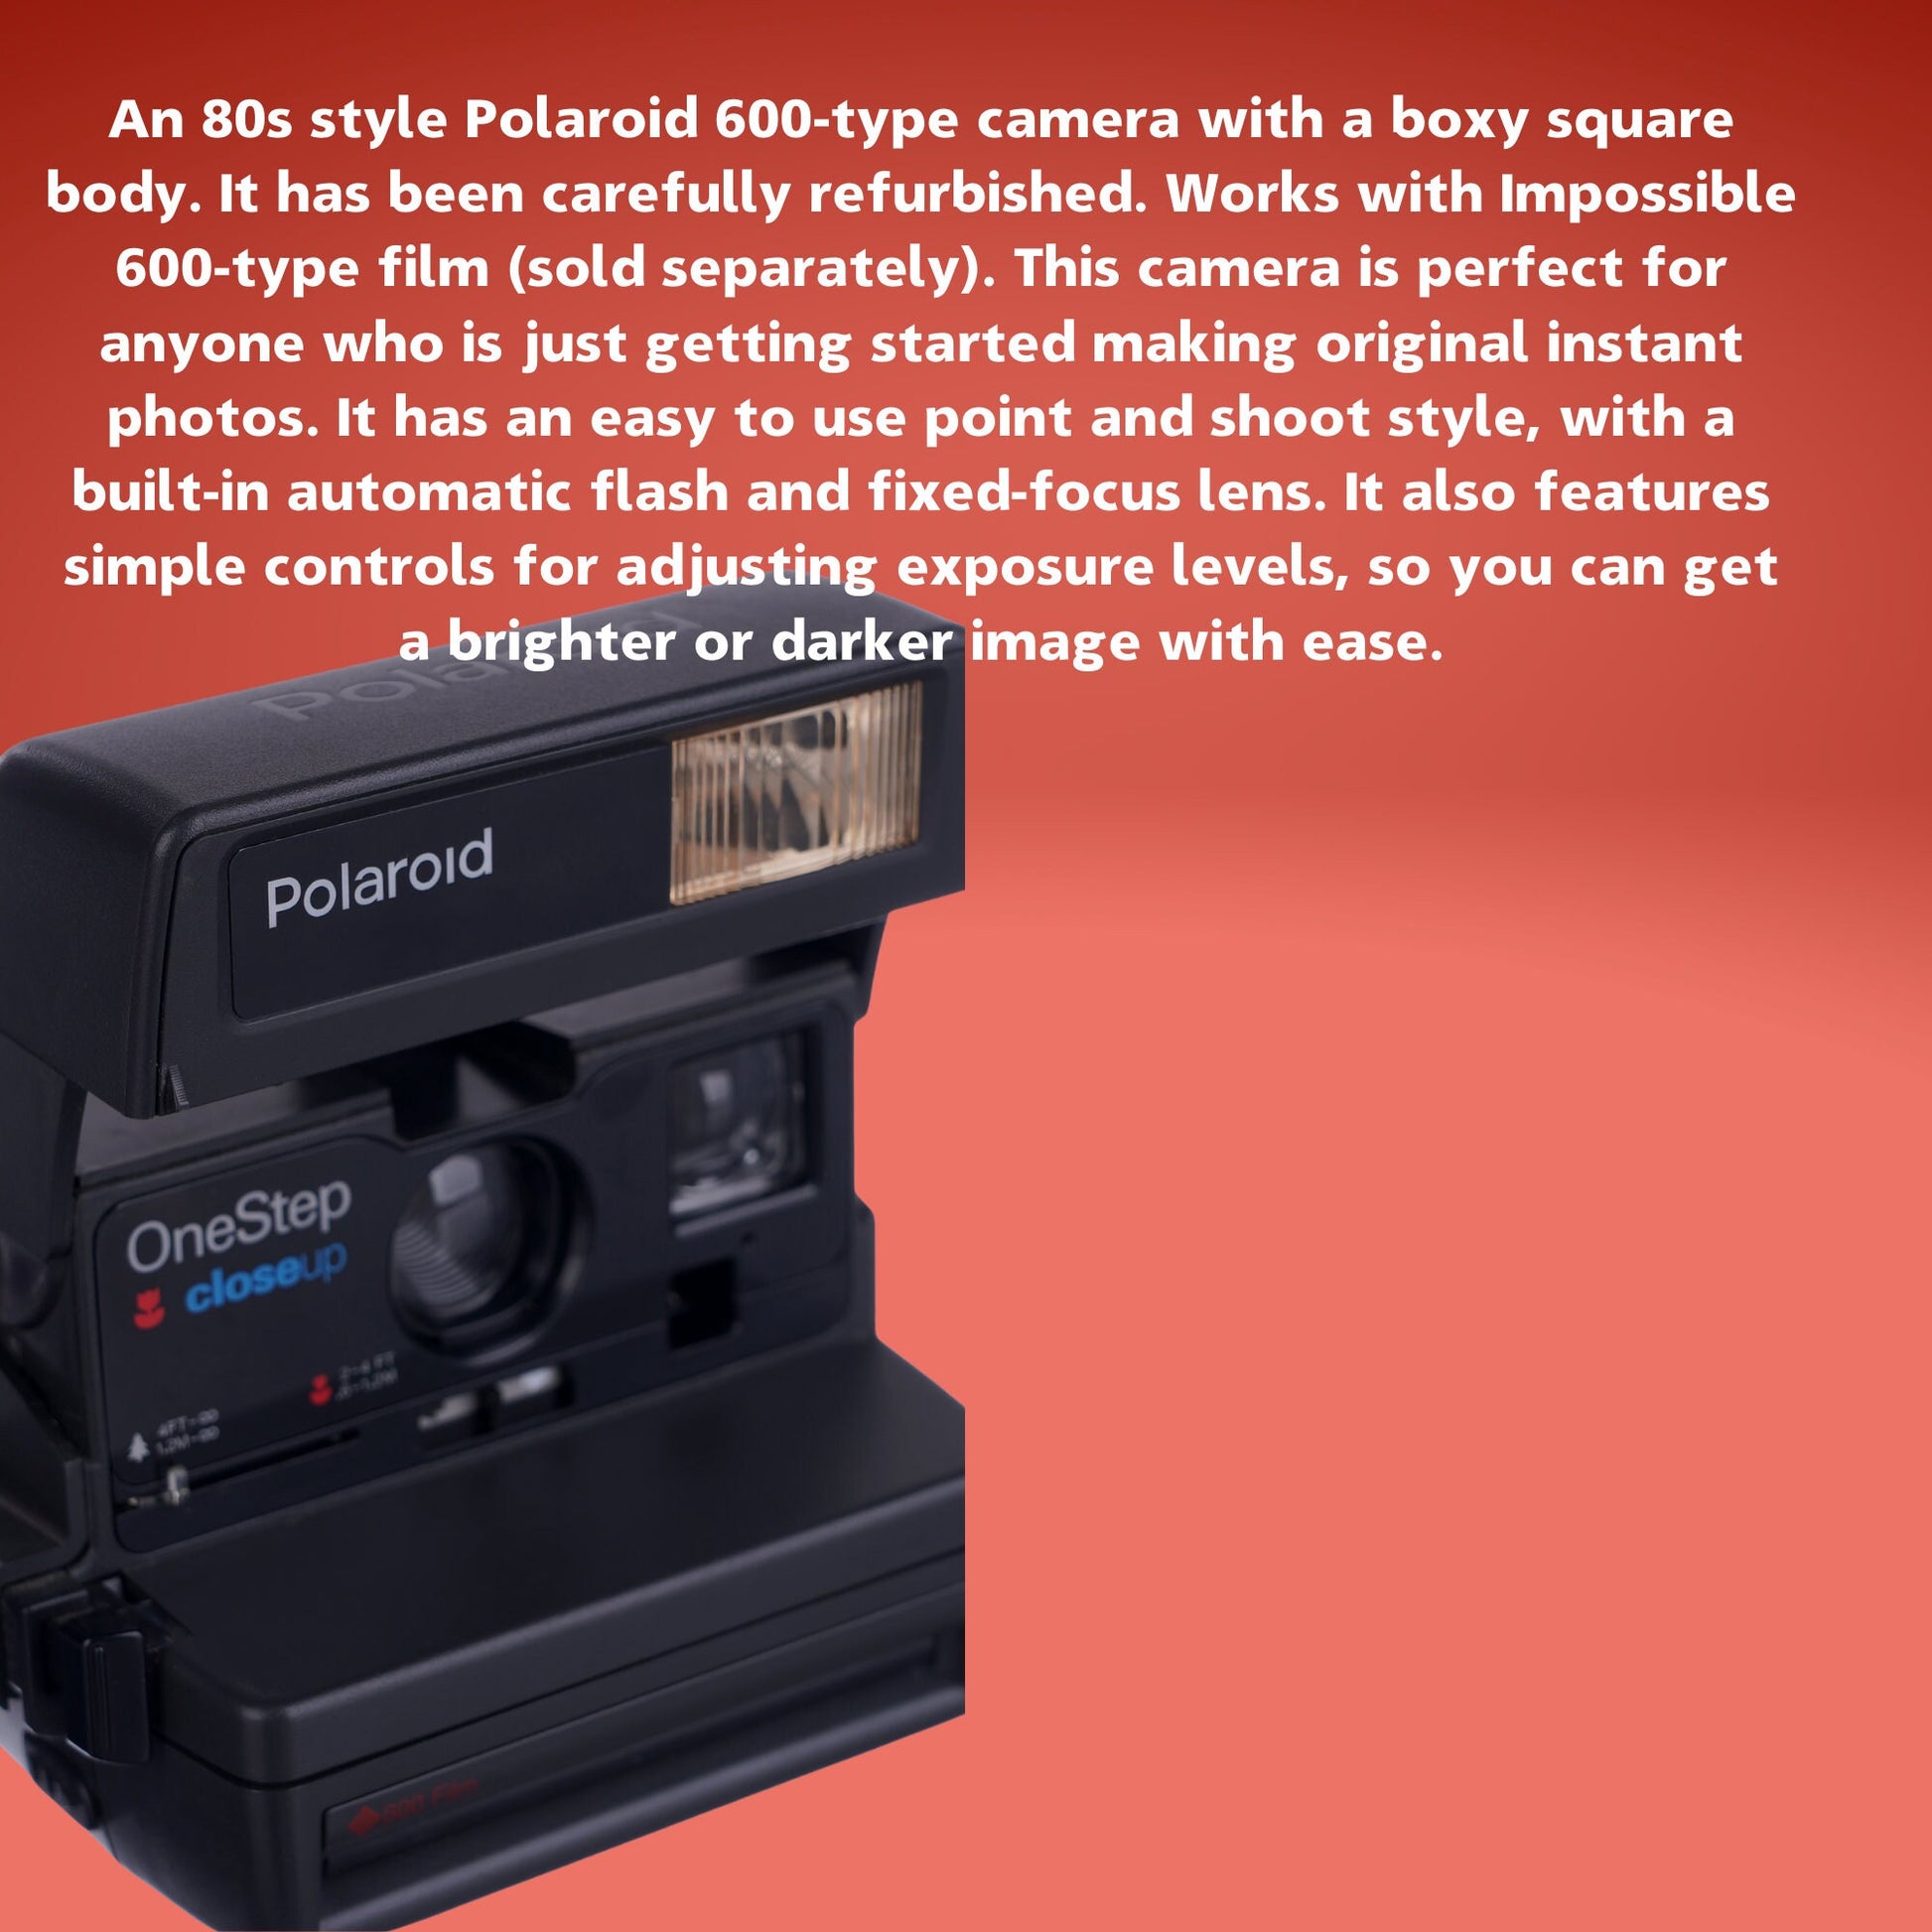 VIntage Polaroid Camera, Old Perfectly Working Instant Camera, Polaroid SuperColors Red - Vintage Polaroid Instant Cameras